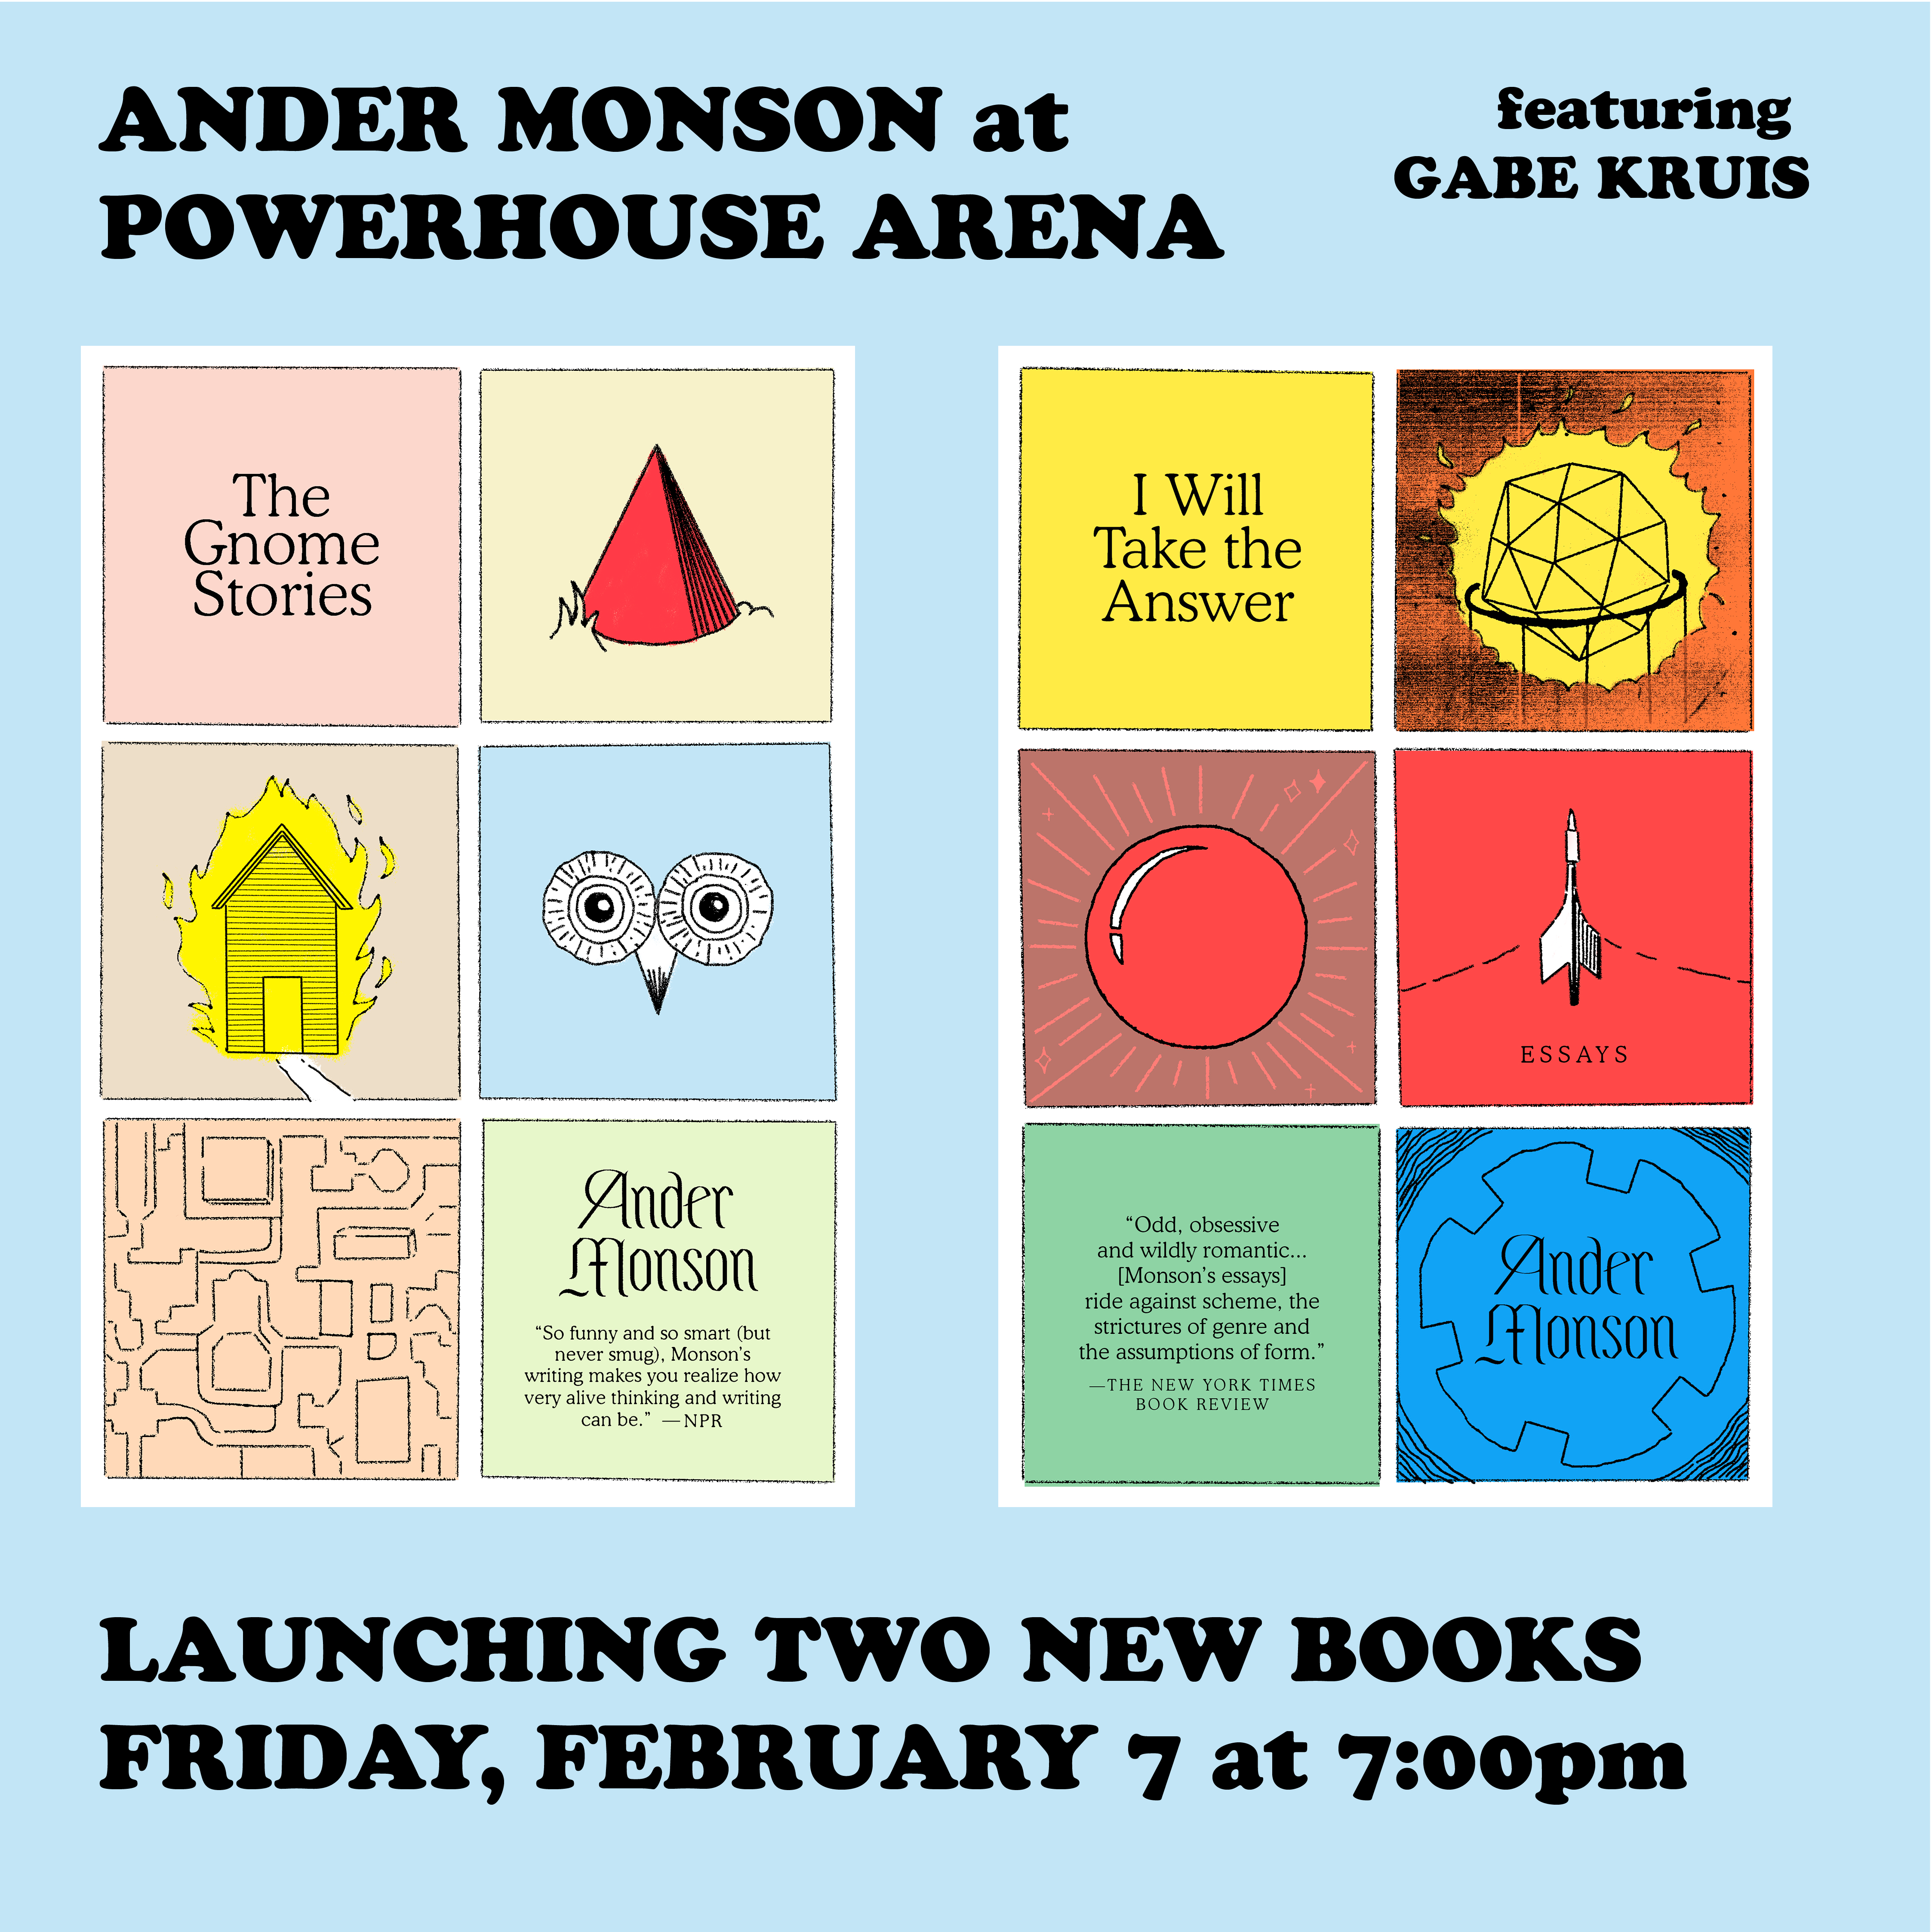 Book Launch: The Gnome Stories and I Will Take The Answer by Ander Monson in conversation with Gabe Kruis